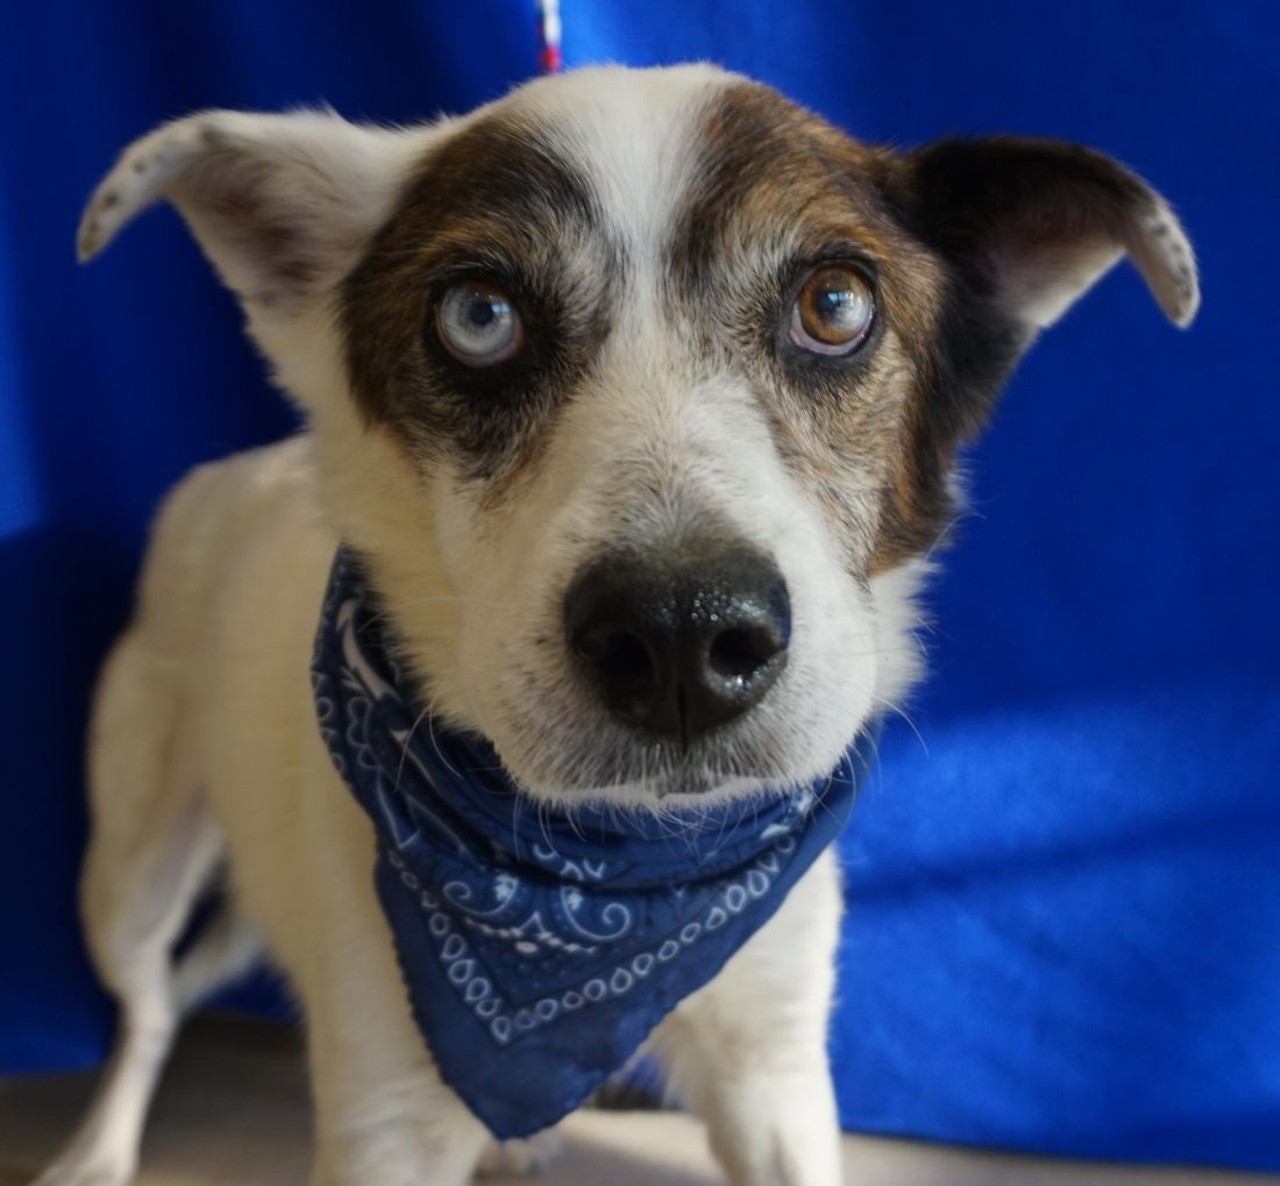  NAME: Clint
GENDER: Male
BREED: Australian Cattle Dog-Blue Heeler mix
AGE: 12 years, 1 months
WEIGHT: 30 pounds
SPECIAL CONSIDERATIONS: Children may startle him
REASON I CAME TO MHS: Agency transfer
LOCATION: Petco of Sterling Heights
ID NUMBER: 861835